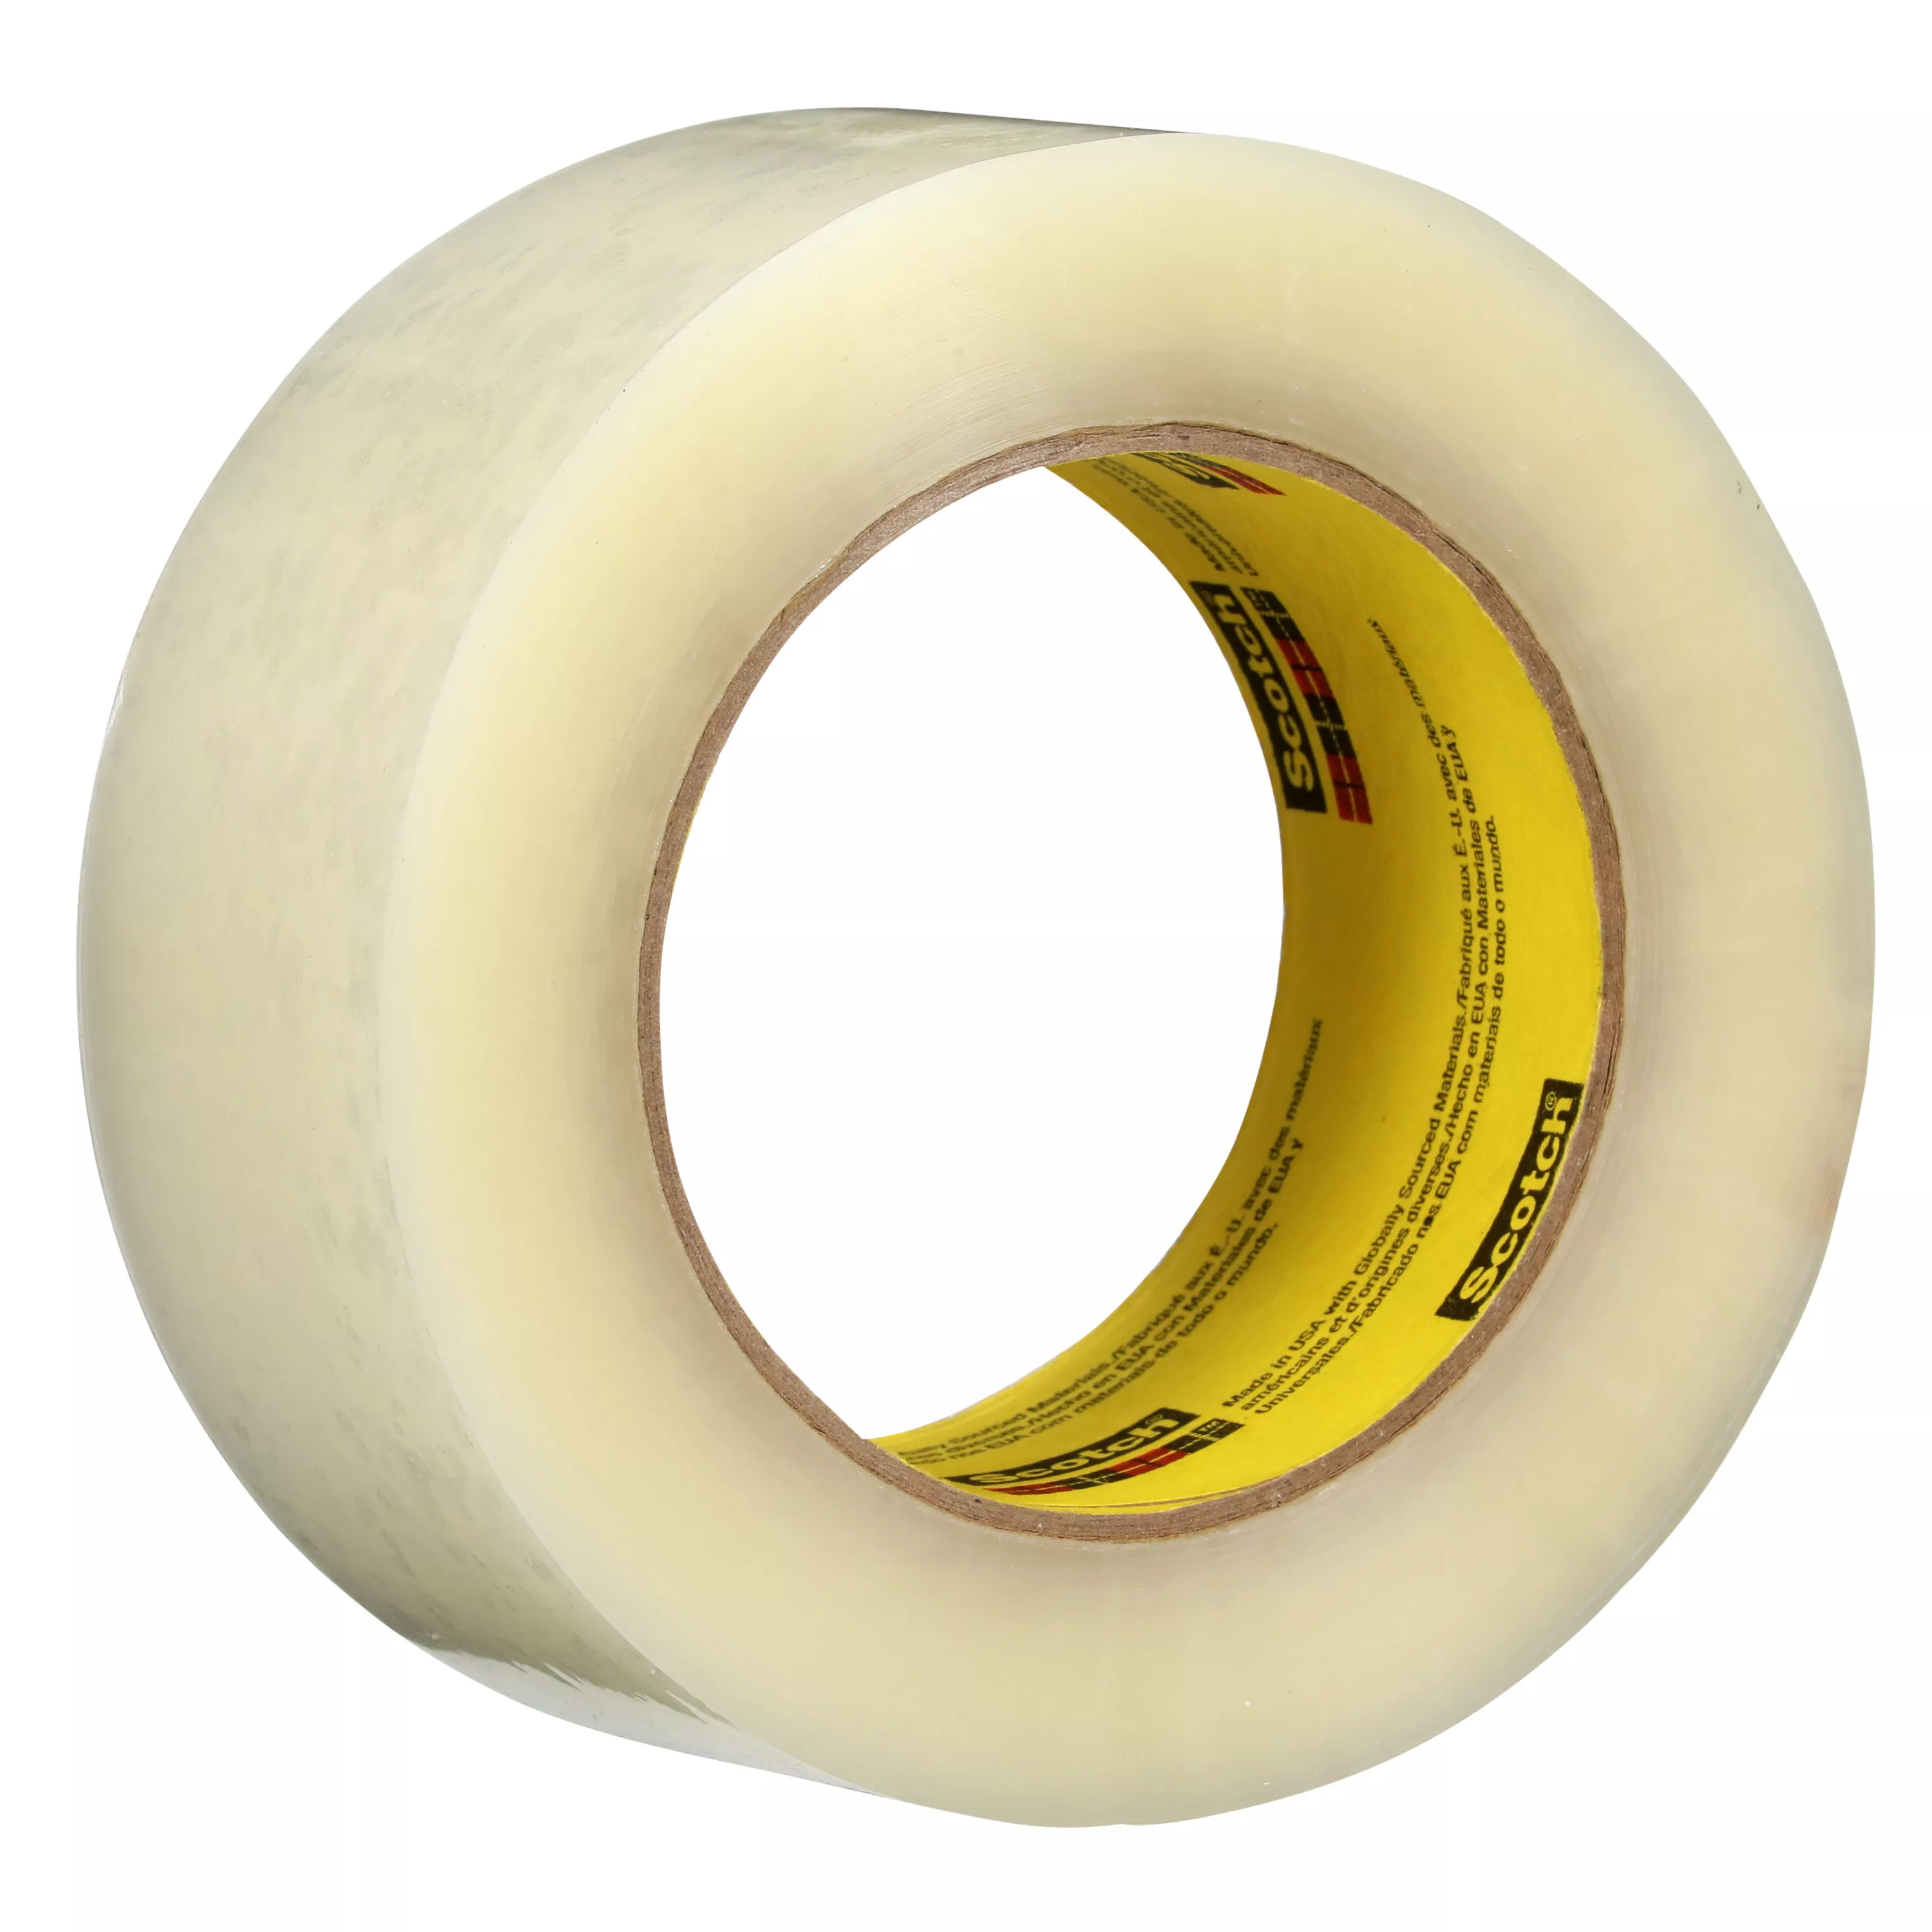 Scotch® High Tack Box Sealing Tape 373+, Clear, 48 mm x 100 m, 36 Rolls/Case, Individually Wrapped